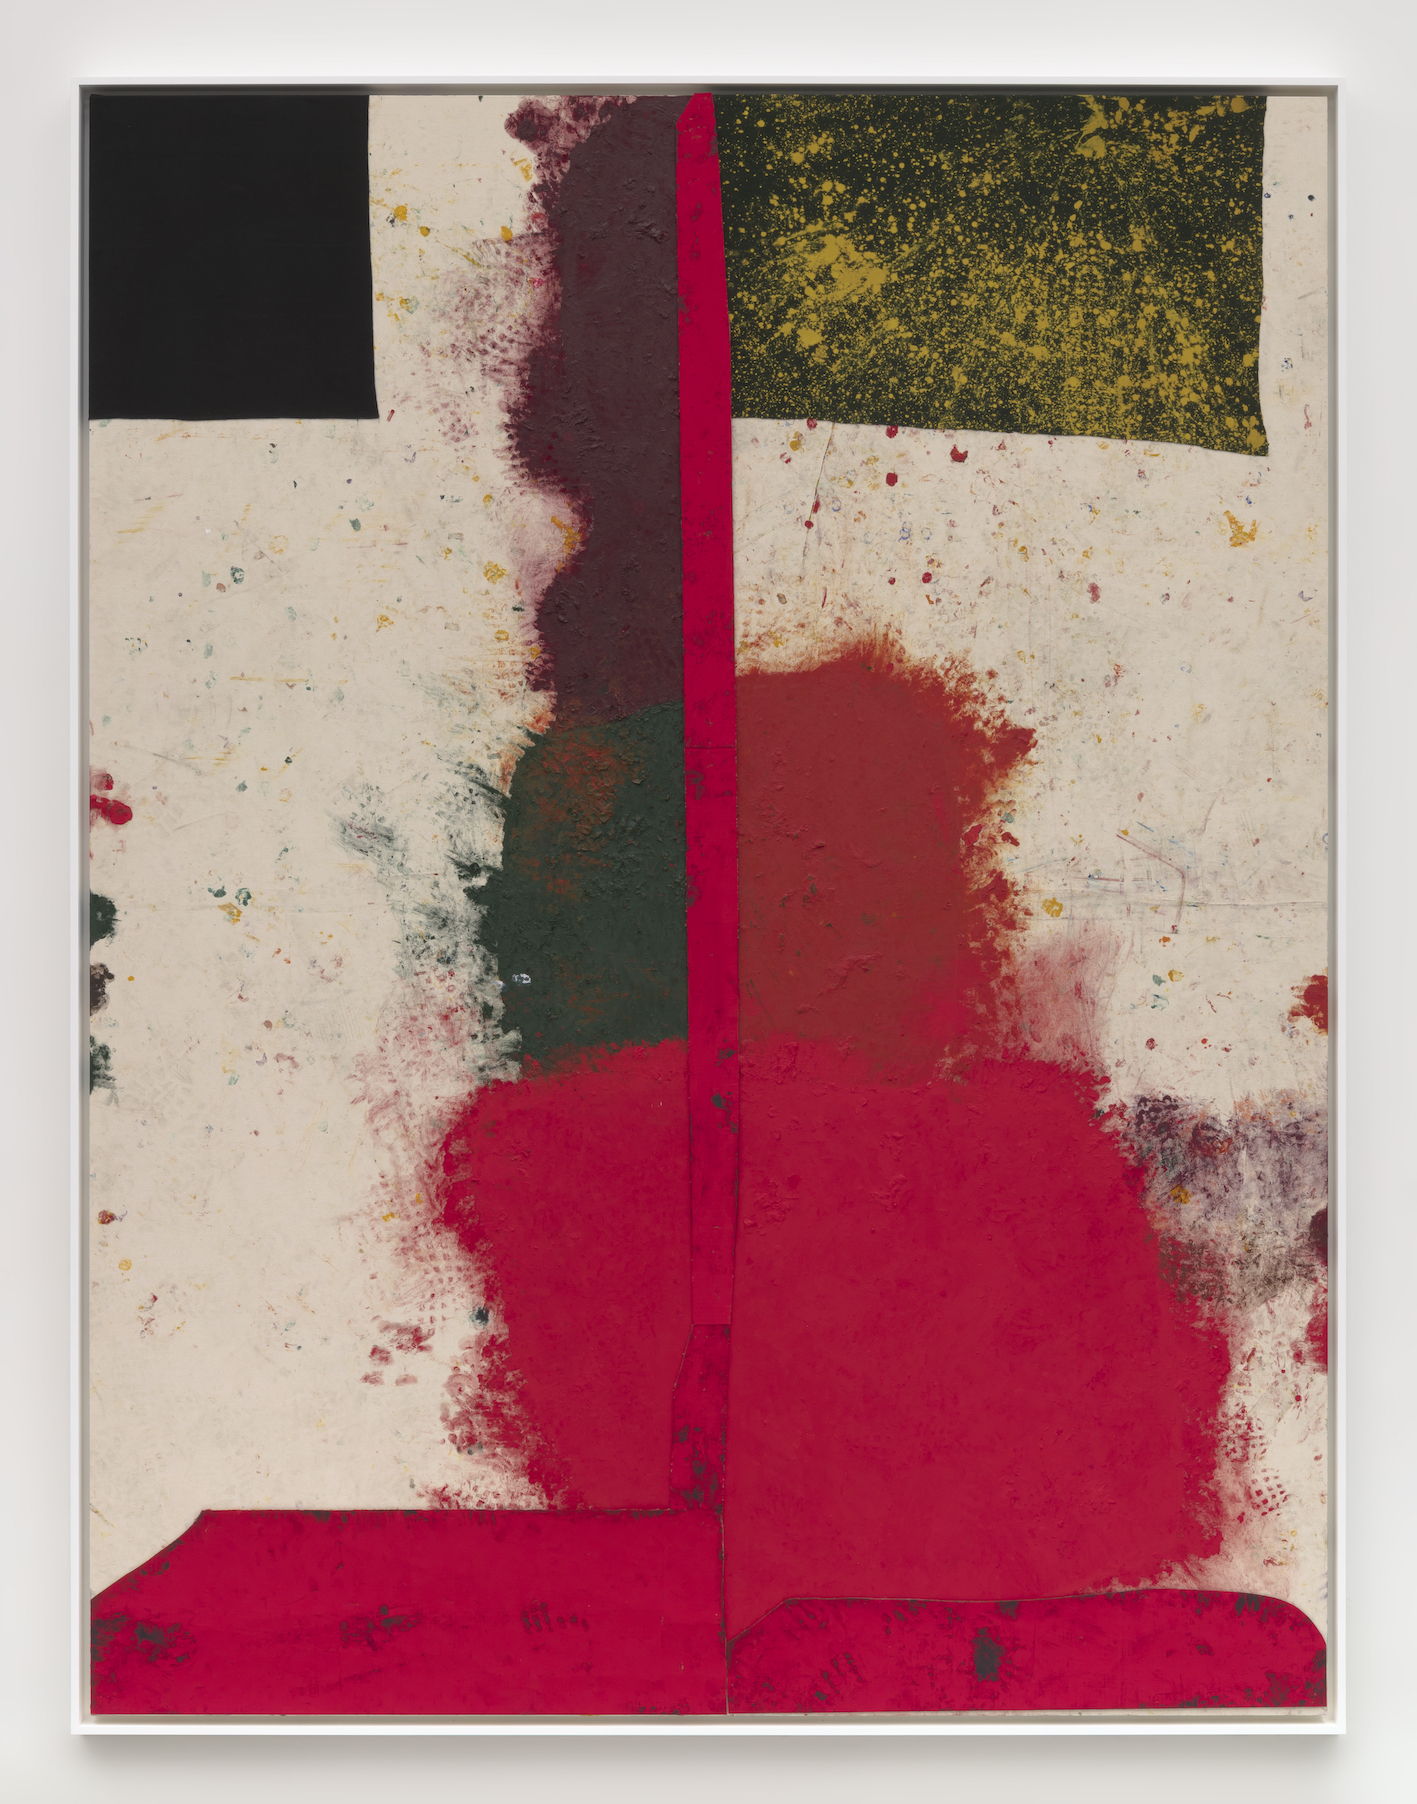 Sterling Ruby, WIDW. RED RIFT., 2018. Acrylic, oil, cardboard and treated fabric on canvas. 320 × 243.8 × 5.1 cm (126 × 96 × 2 in.). Courtesy the Artist and Xavier Hufkens, Brussels